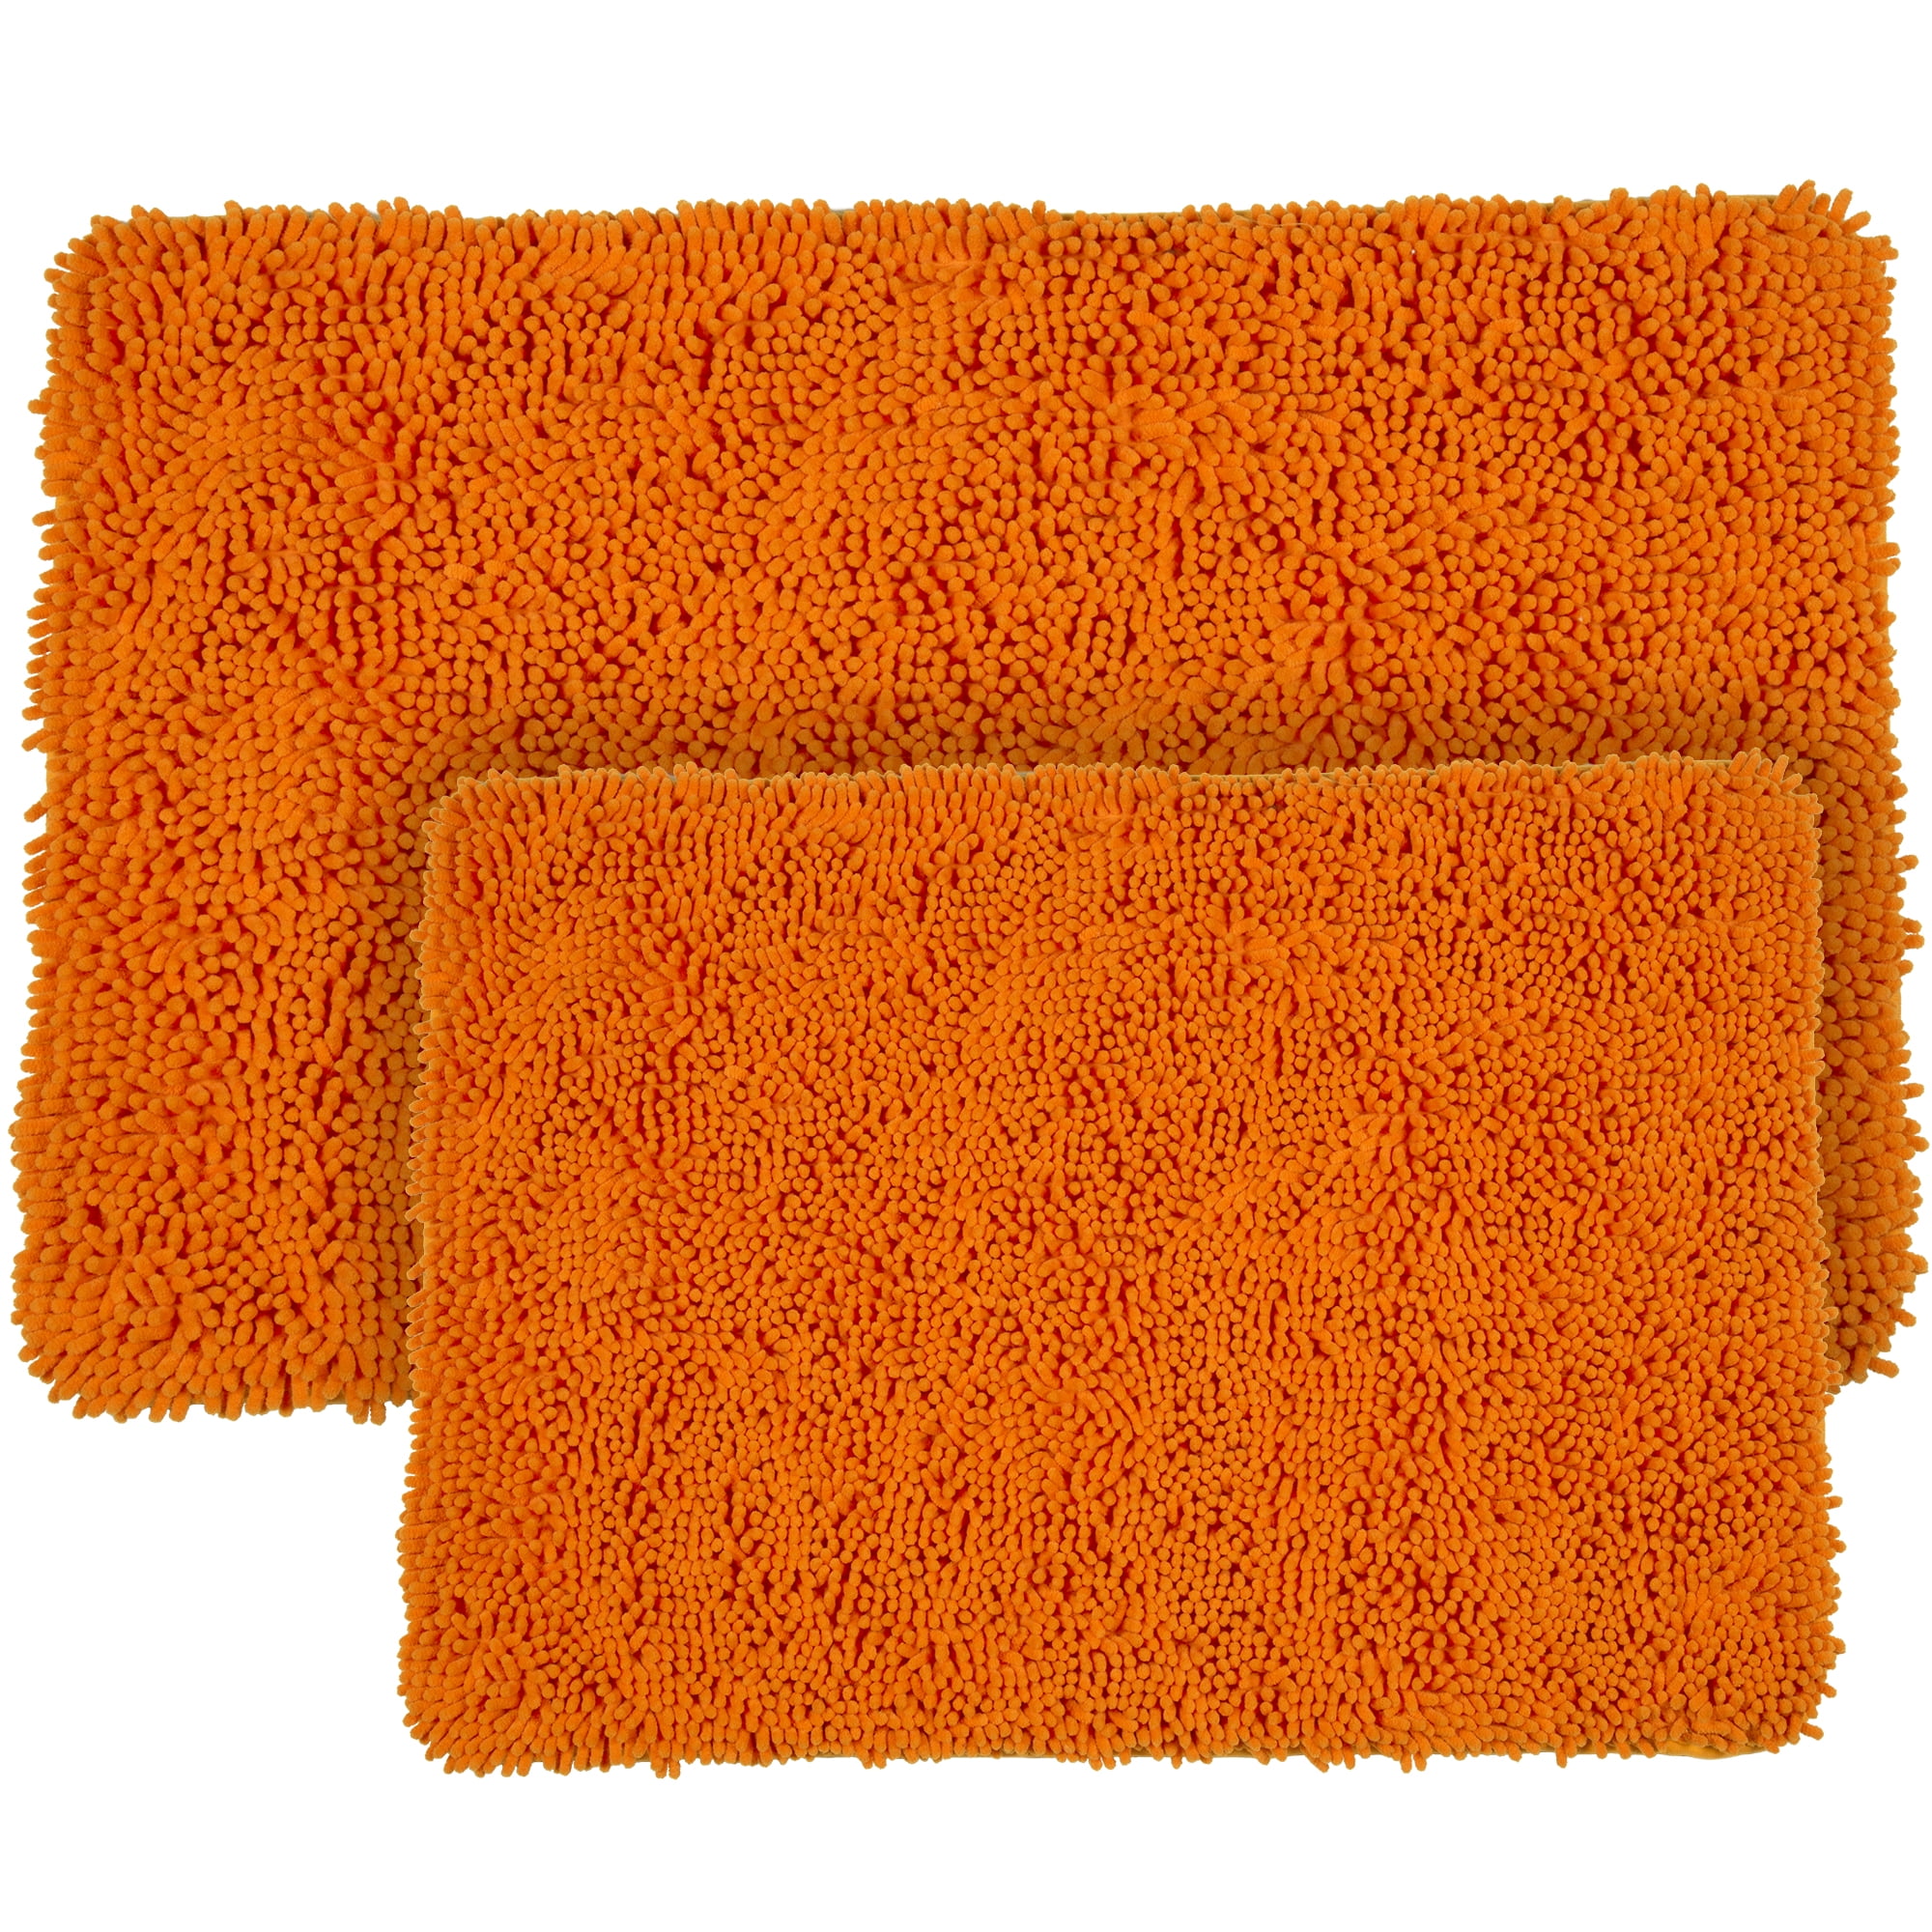 Bathroom Rug Set Of 2 – Memory Foam Bathmats With Embossed Coral Fleece Top  – Non-slip Absorbent Rugs For Shower Or Laundry By Lavish Home (brown) :  Target